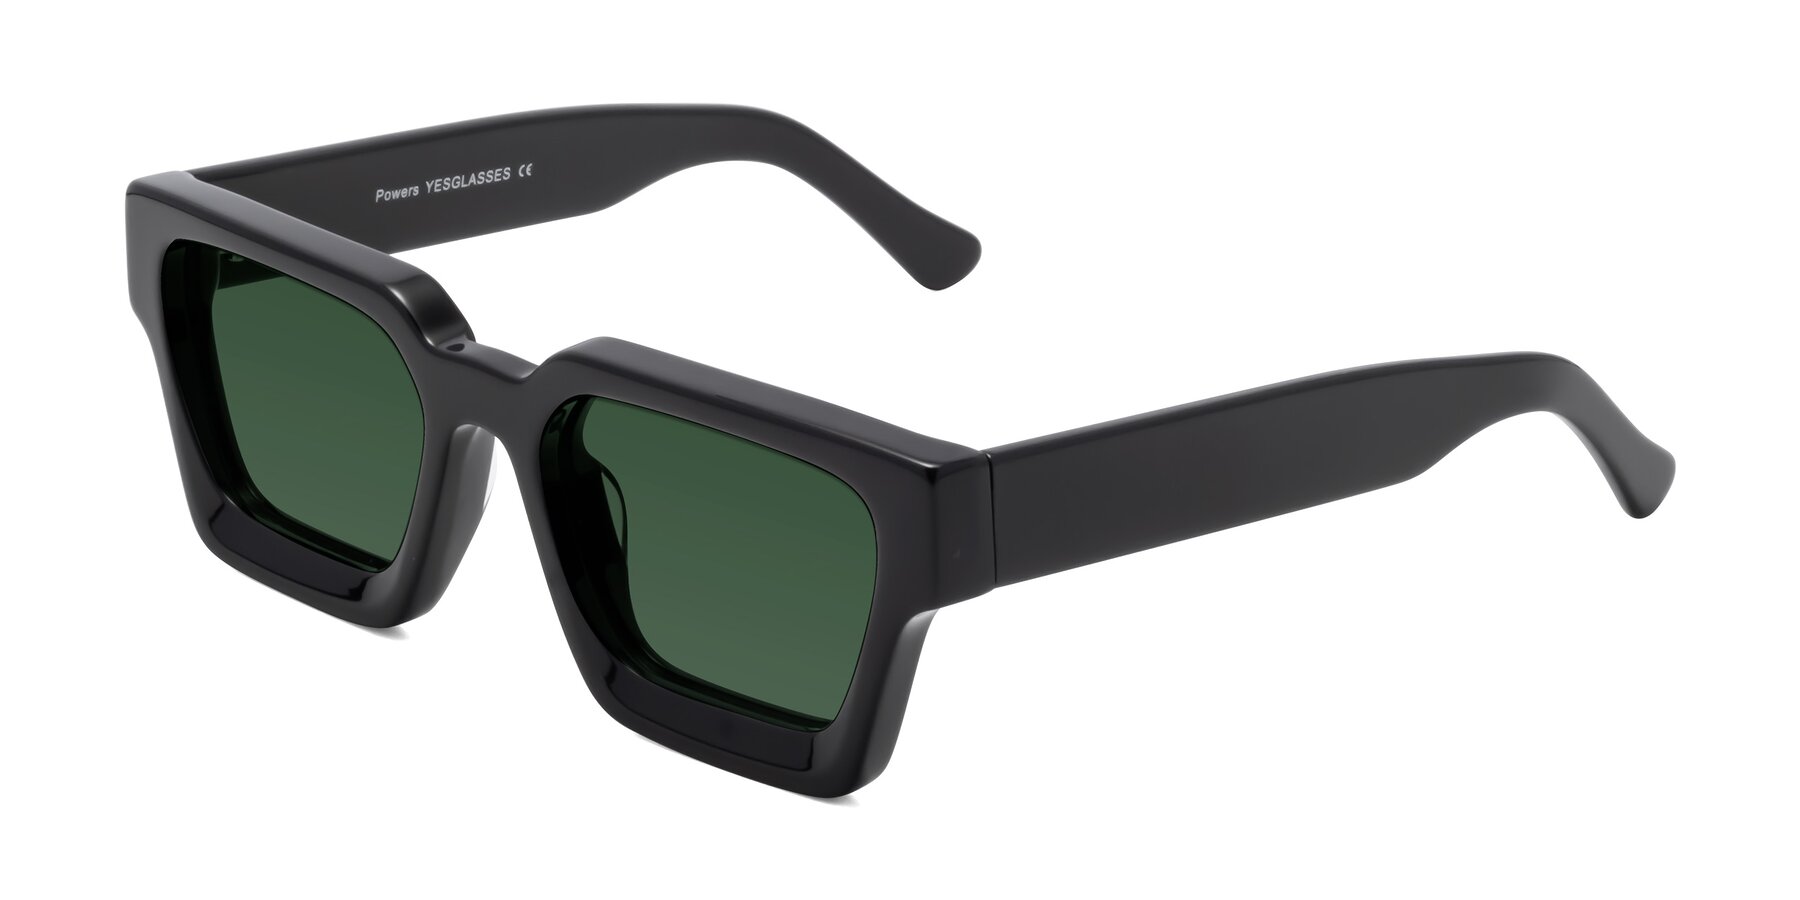 Angle of Powers in Black with Green Tinted Lenses